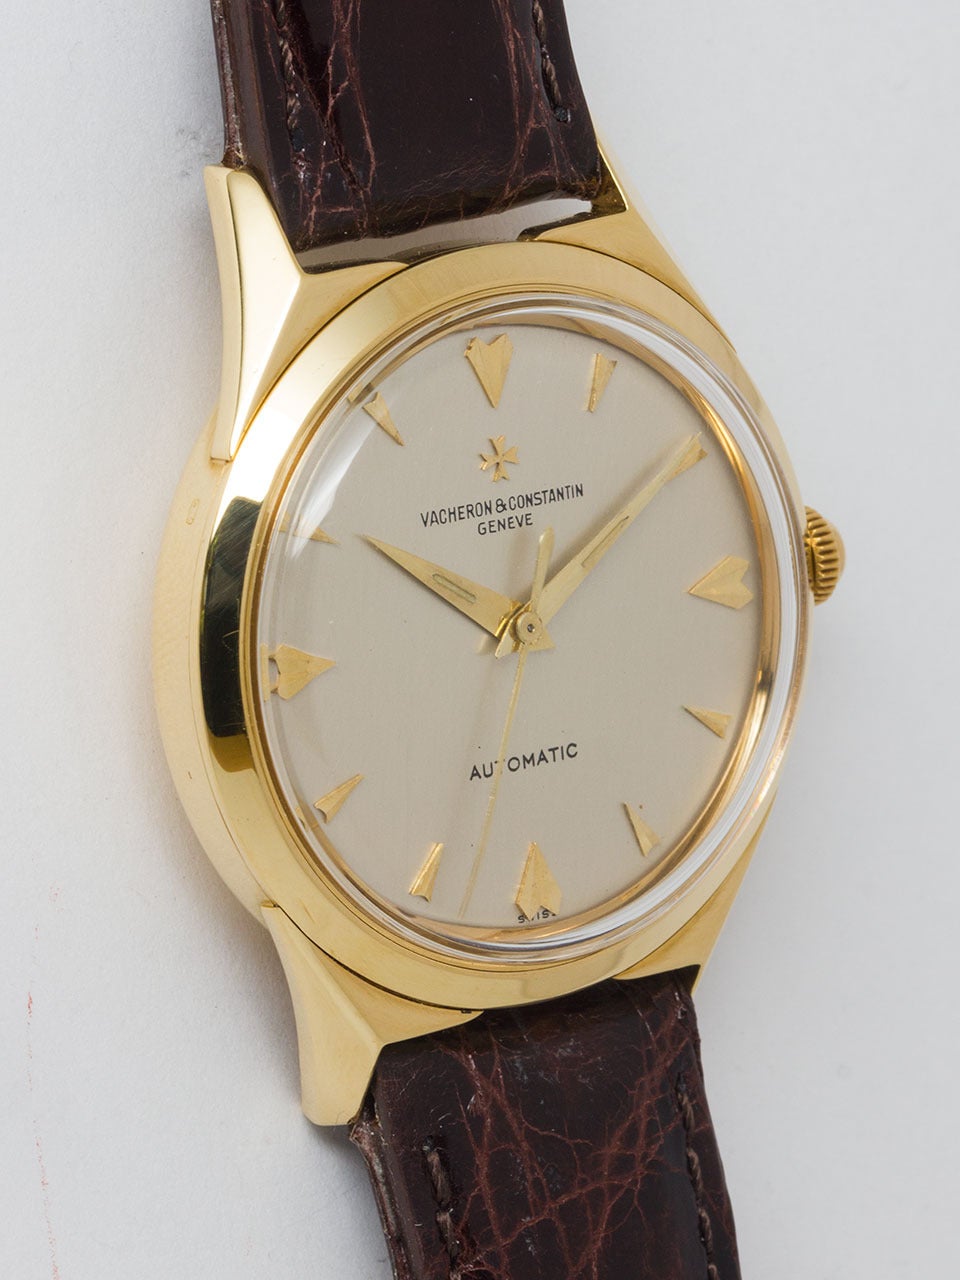 Vacheron & Constantin 18K Yellow Gold Automatic ref 6073 circa 1960's. 36 x 44mm large sculpted flared lug tonneau shaped case with screw down caseback. Original silvered satin dial signed Vacheron & Constantin Geneve Automatic. With applied chevron